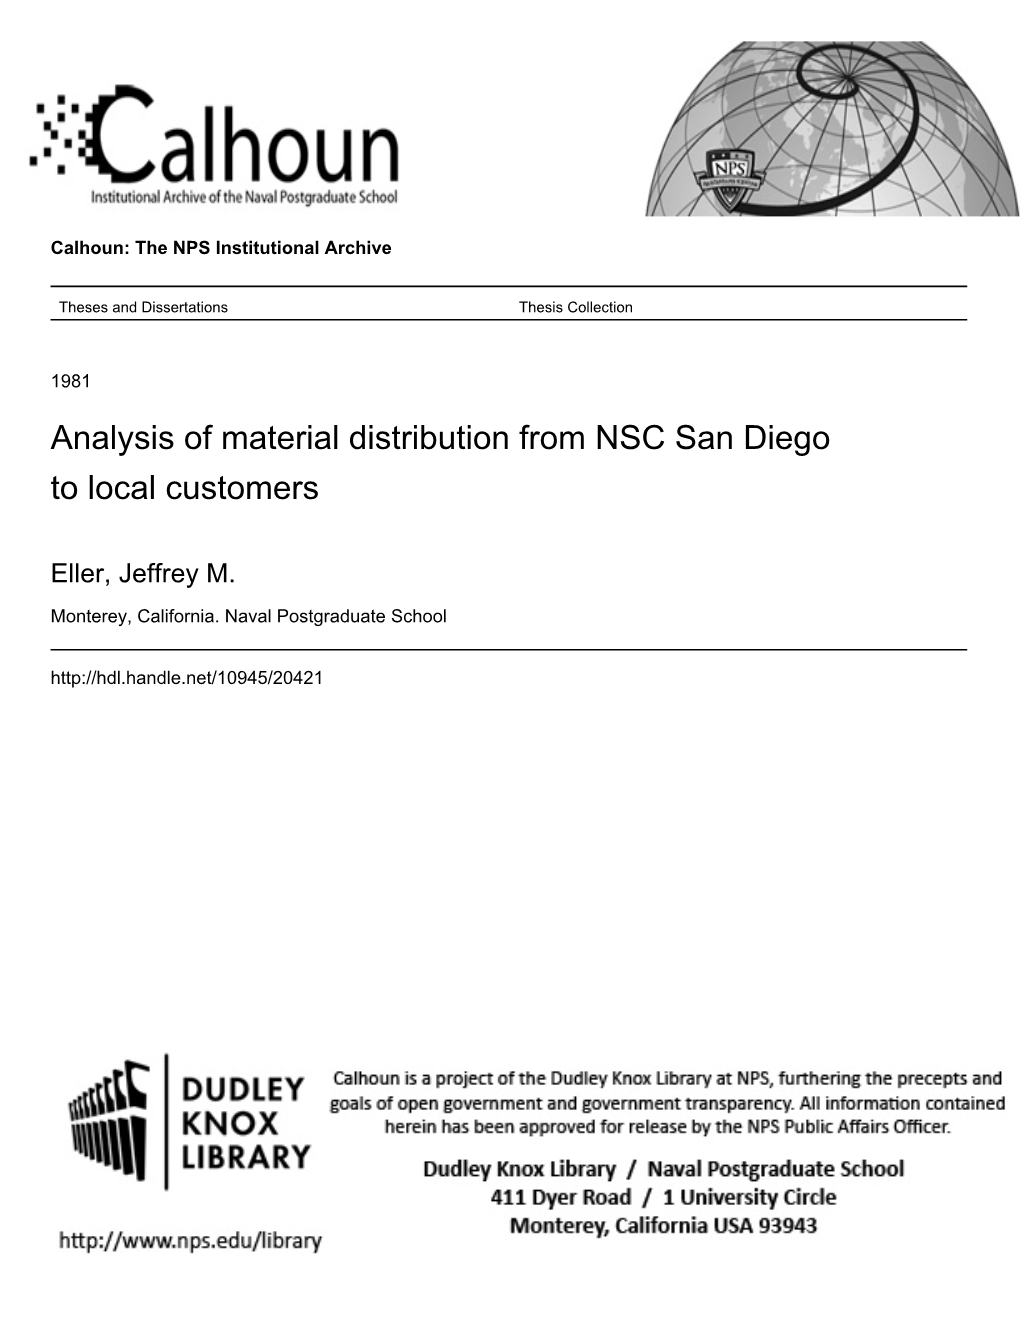 Analysis of Material Distribution from NSC San Diego to Local Customers